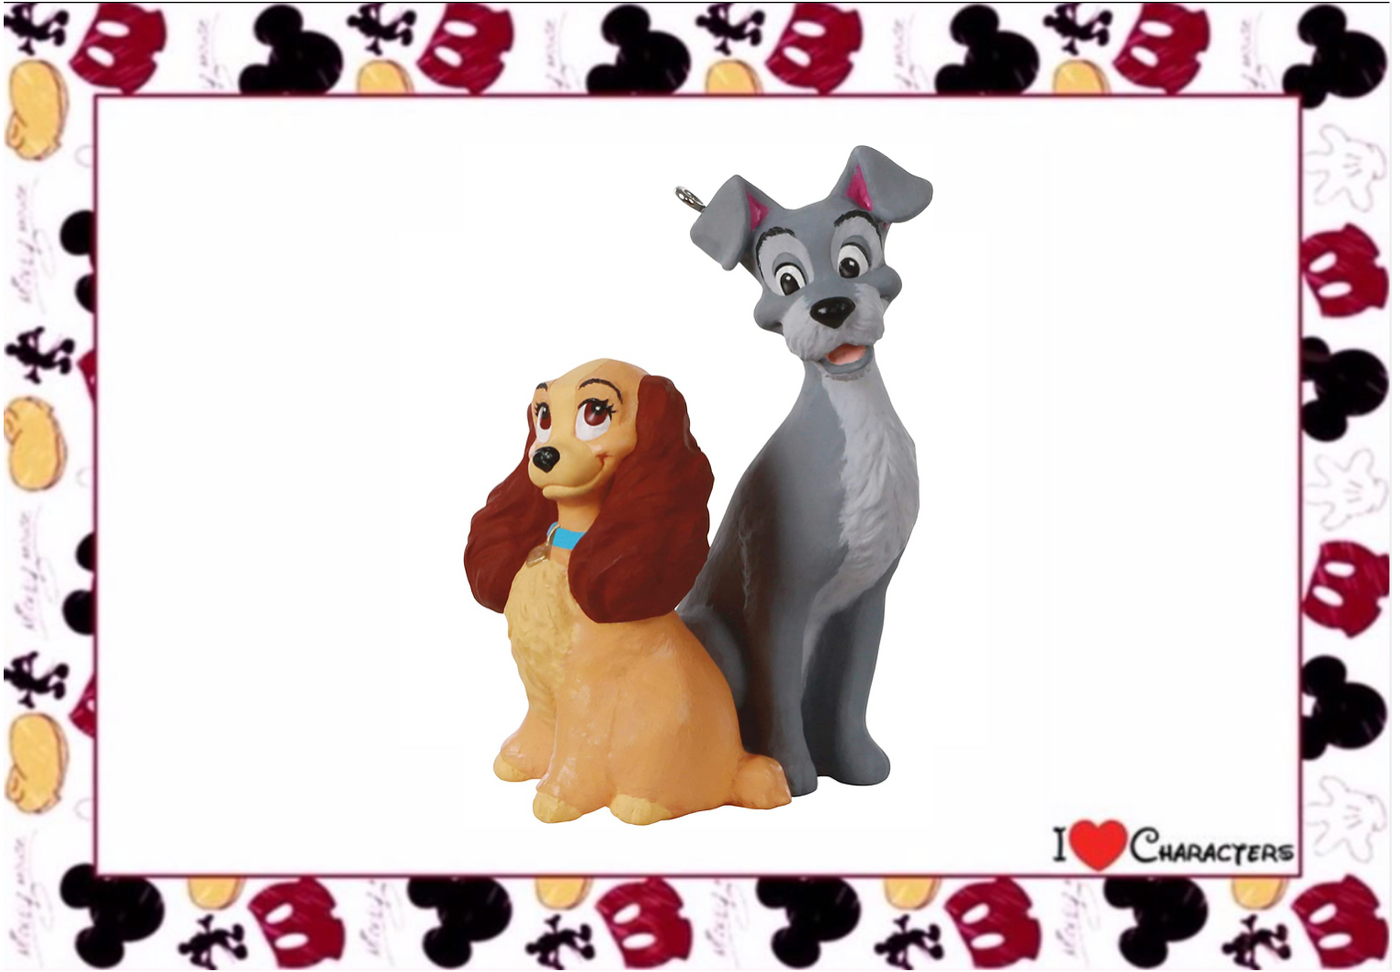 Hallmark Disney Lady and the Tramp 65th Christmas Ornament New with Box